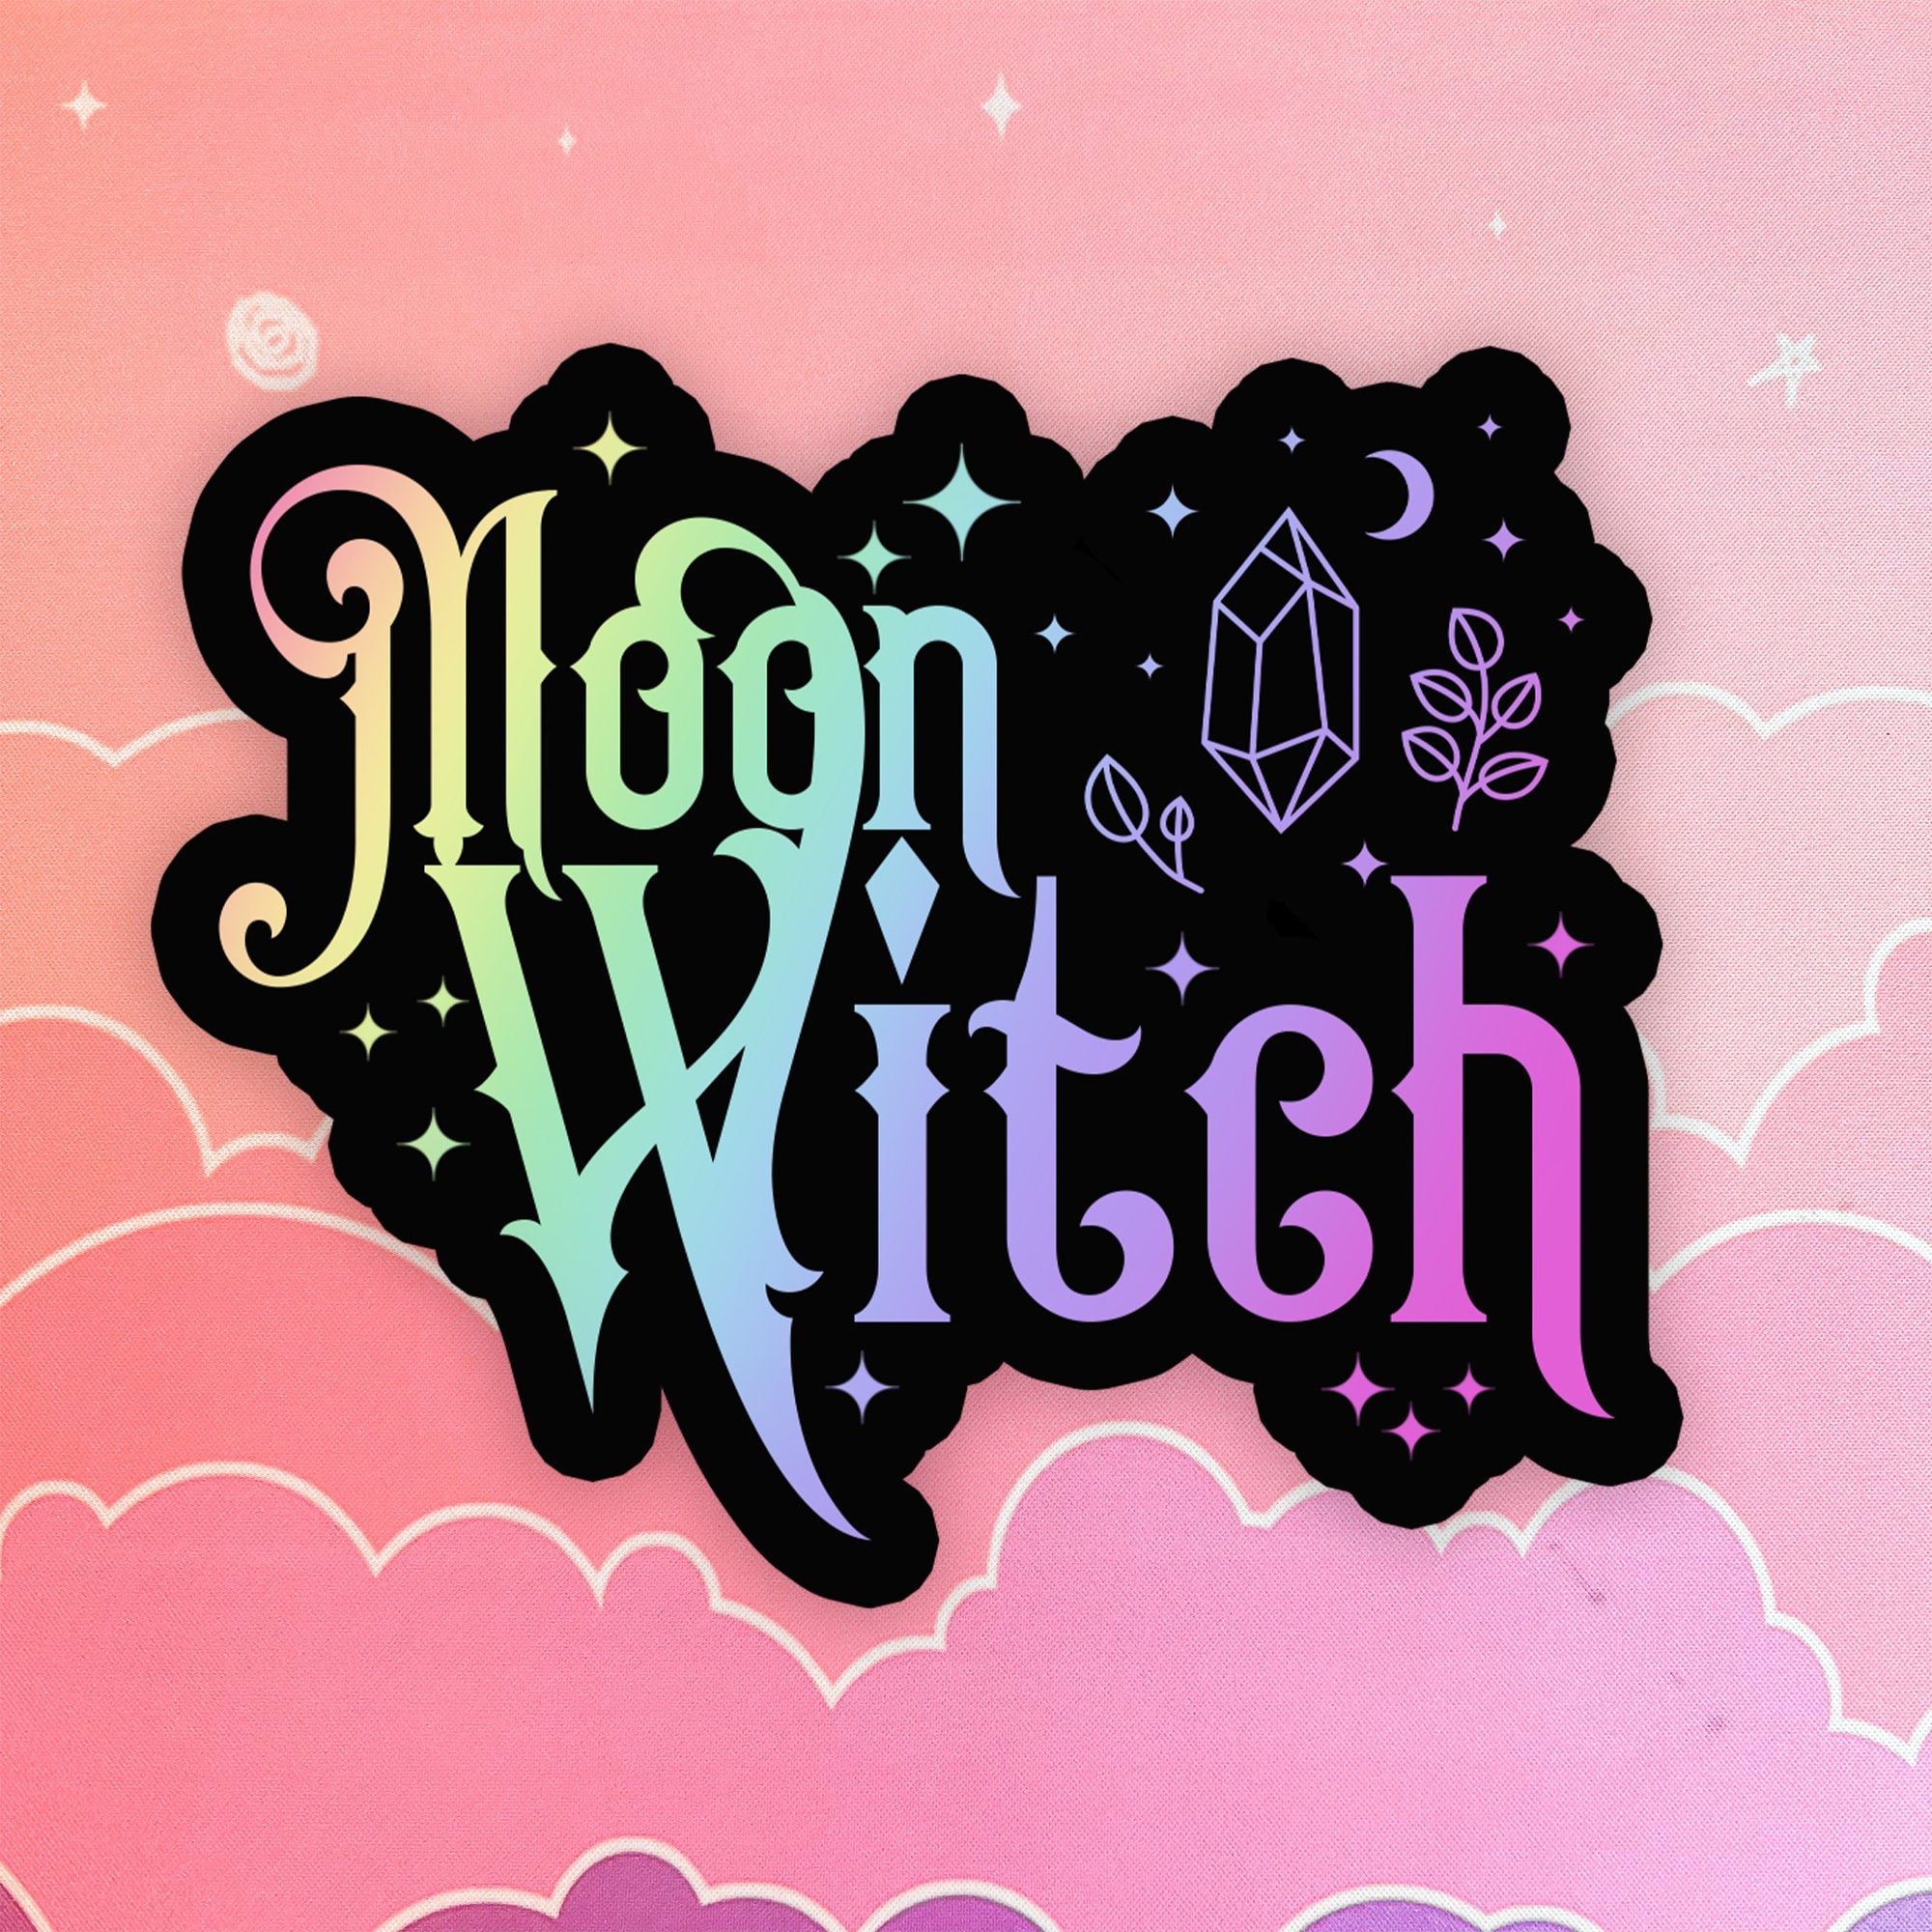 Moon Witchy Sticker Halloween Aesthetic Laptop Sticker Purple and Rainbow Spooky Girly Stickers Cute Goth Kindle Stickers Hydroflask, Kawaii